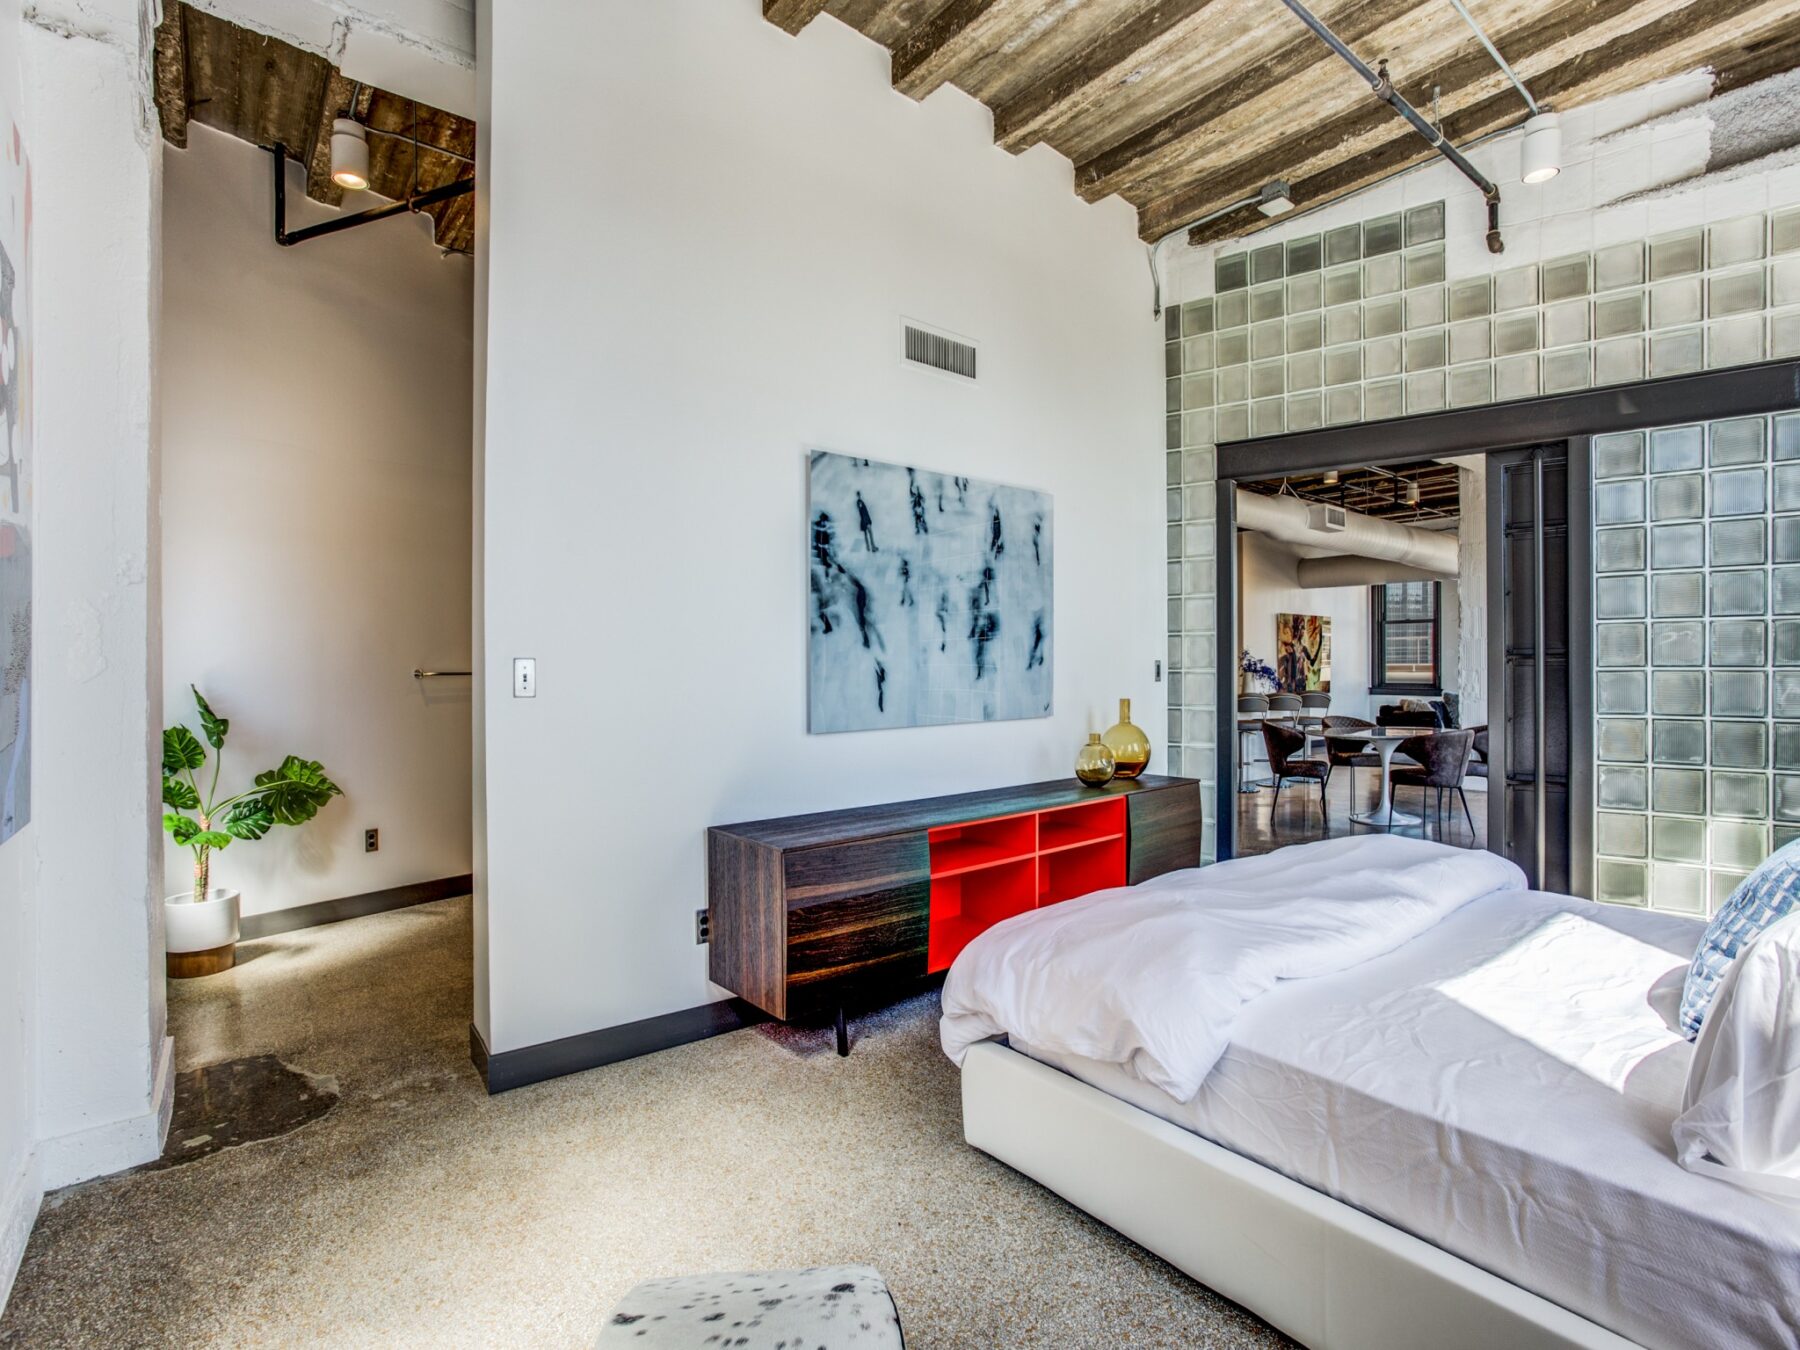 Bedroom with hard flooring, wooden rafters above bed, decorative glass wall with sliding barn door.